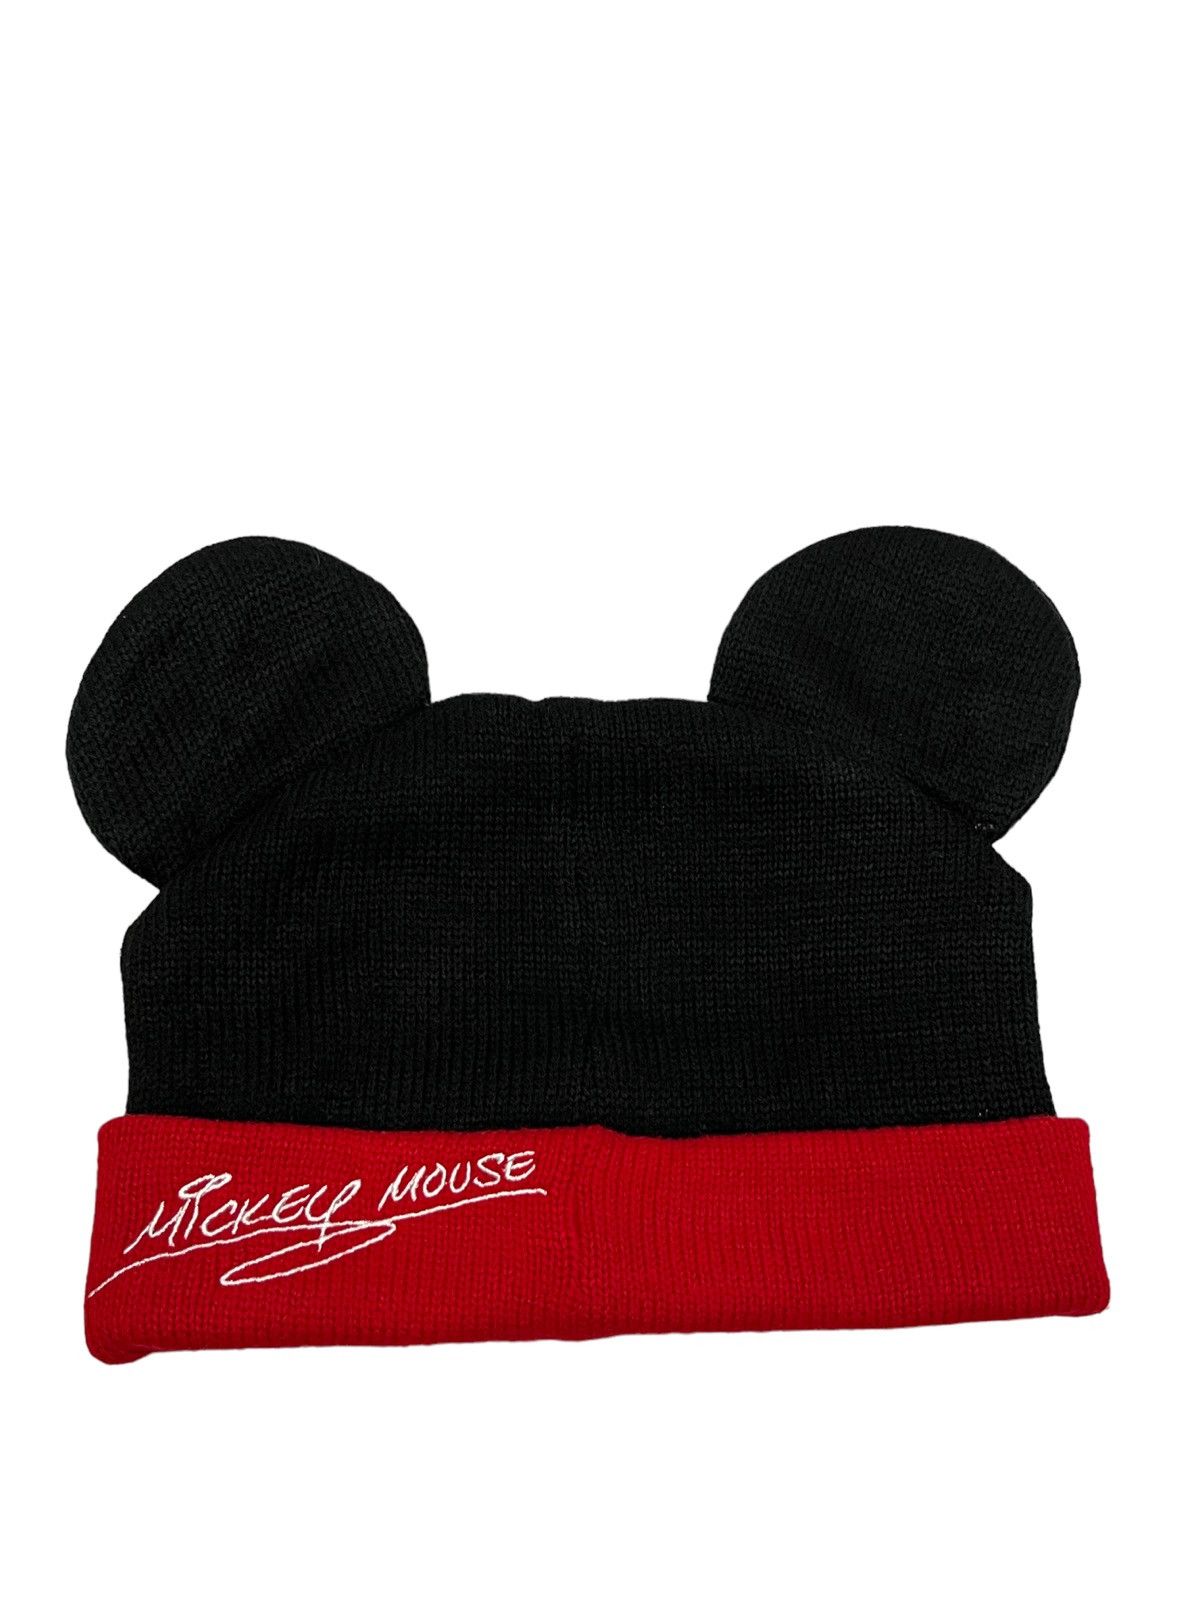 Mickey Mouse TOKYO DISNEY MICKEY MOUSE Acrylic Ear Beanie Hat Size ONE SIZE - 5 Thumbnail